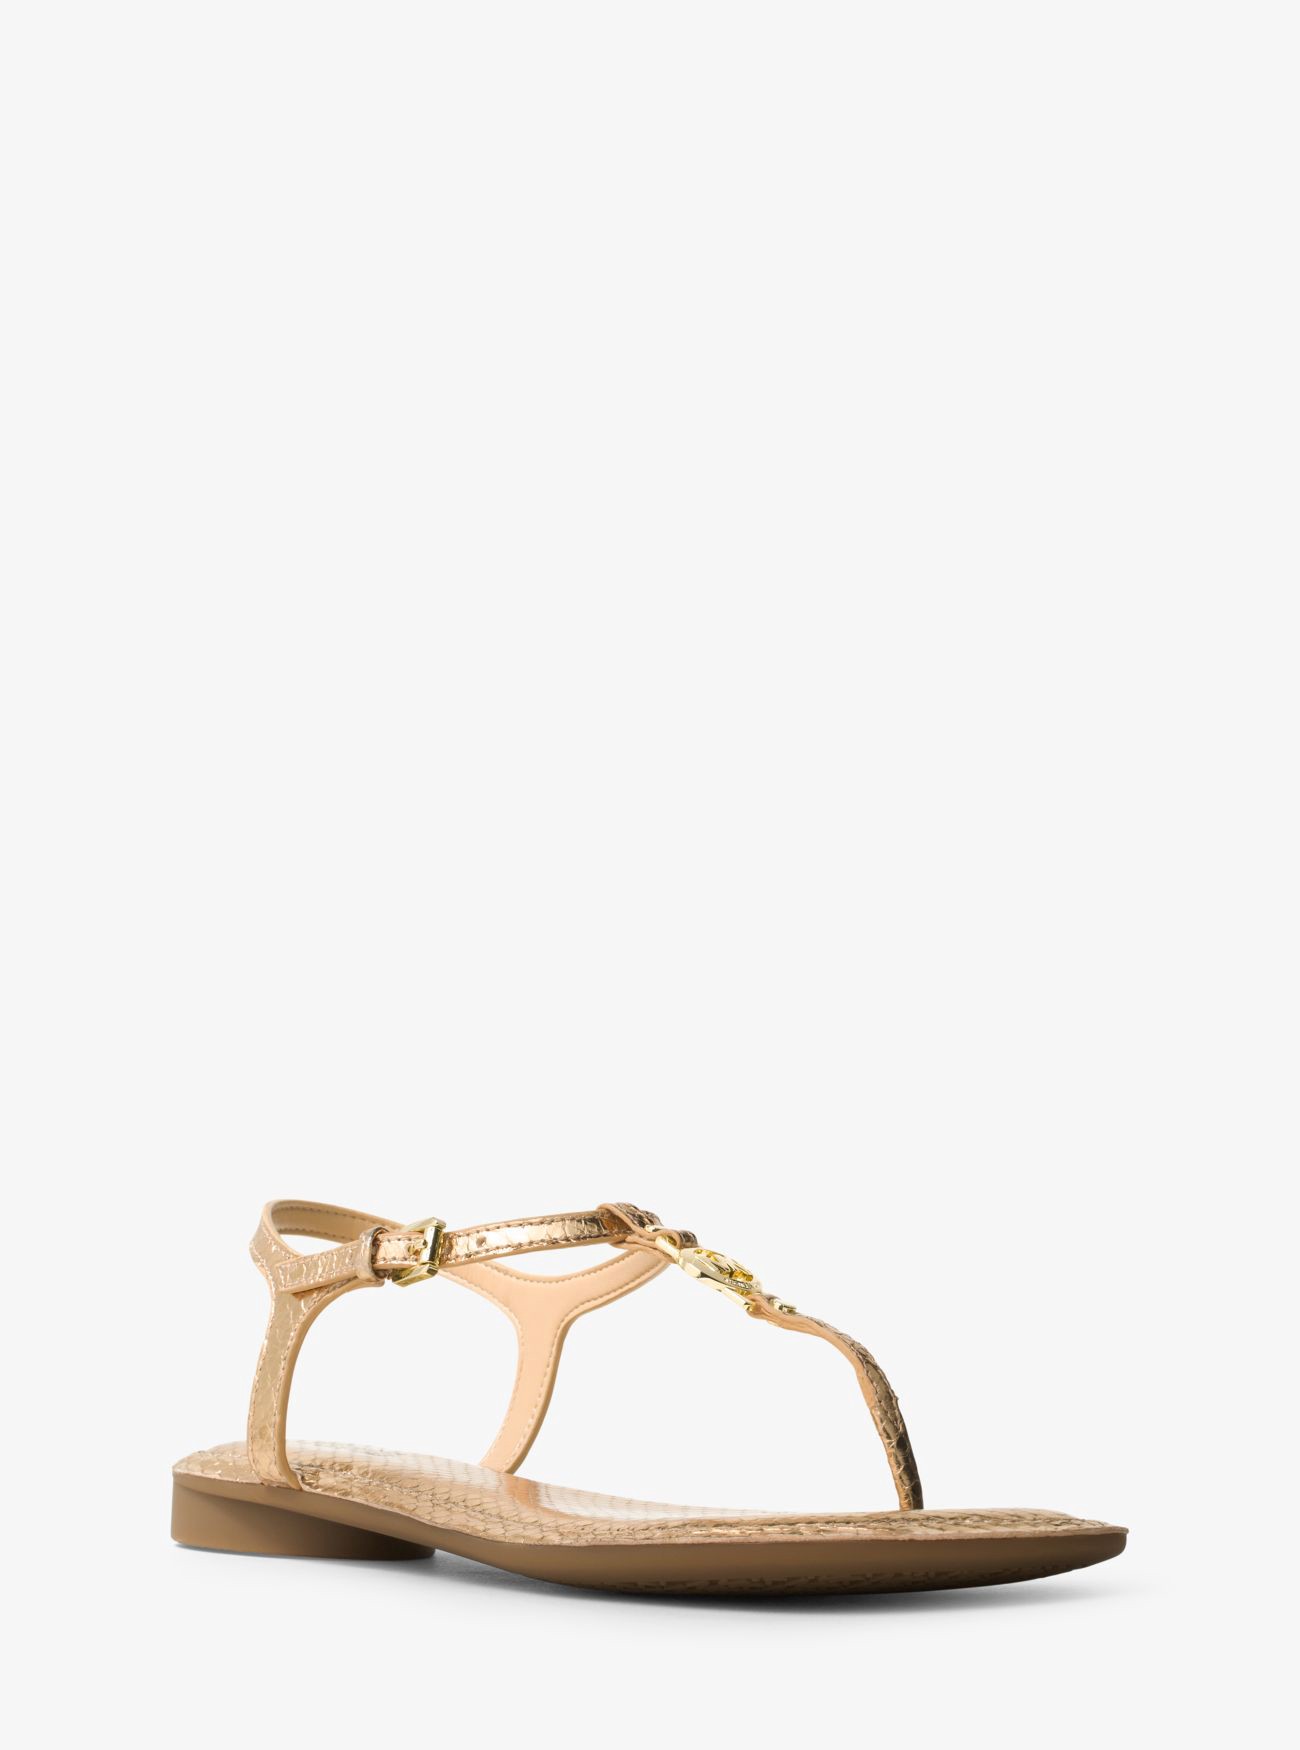 Michael Kors Bethany Metallic Embossed-leather Thong In Pale Gold | ModeSens